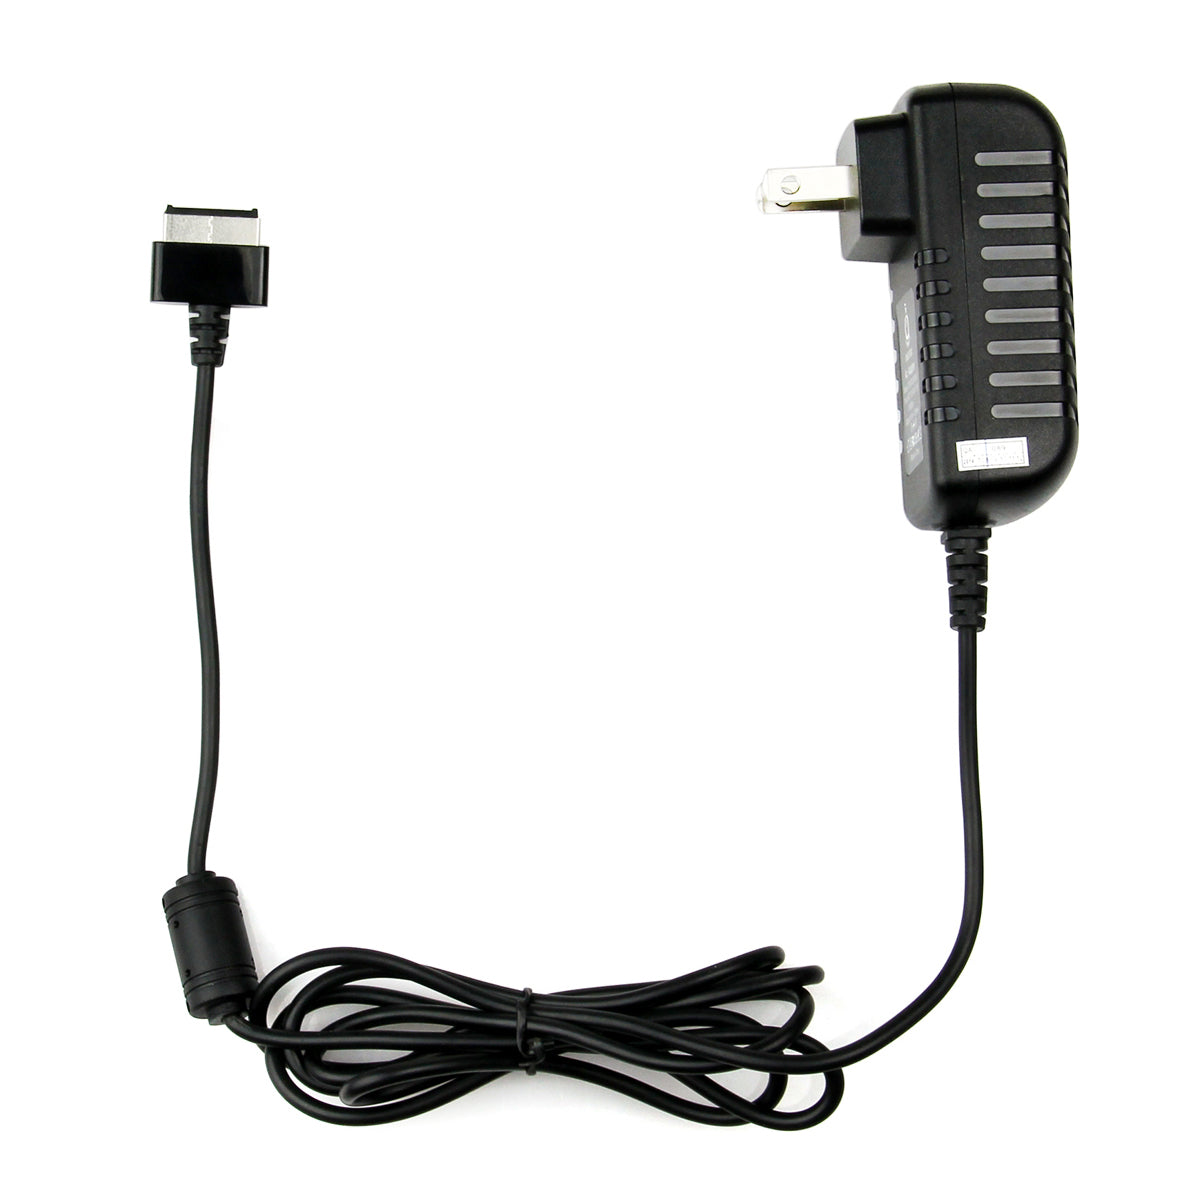 AC Adapter Charger for ASUS TF201 A1 Eee Pad.